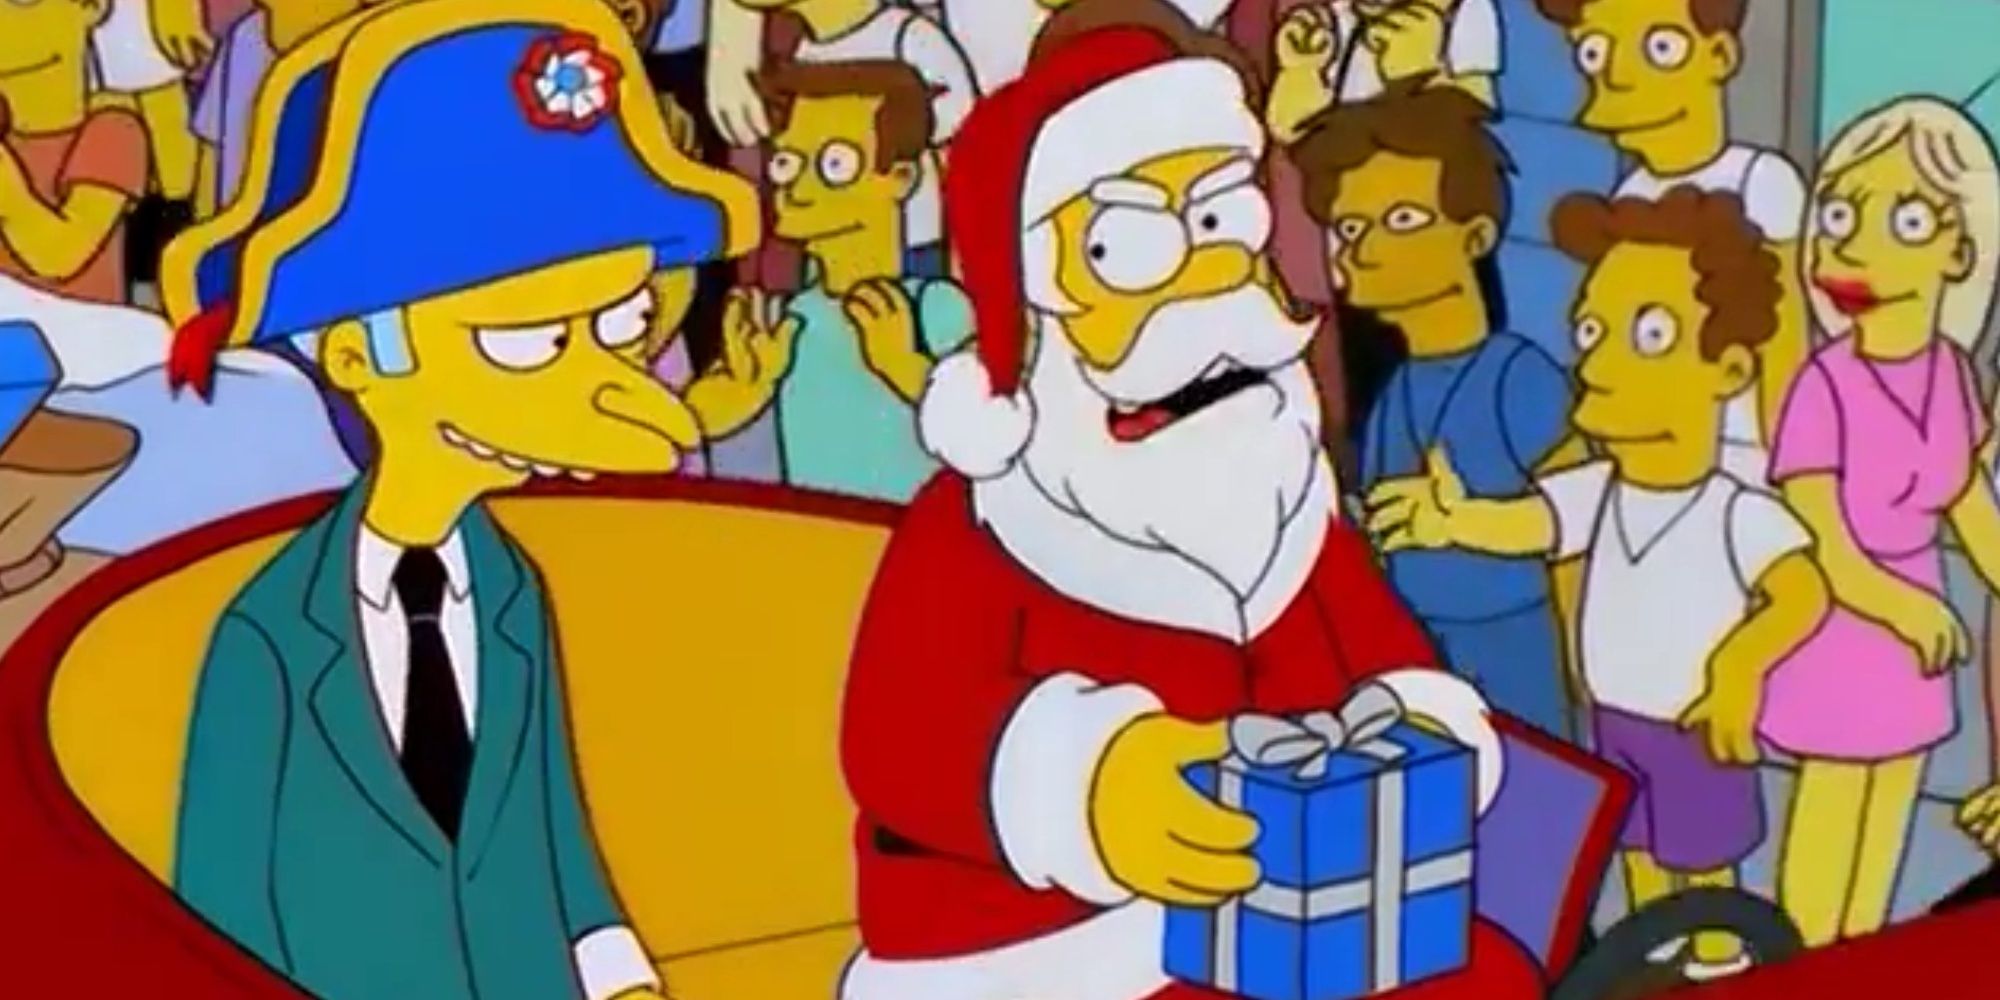 Homer sits next to Mr. Burns dressed as Santa Claus in The Simpsons